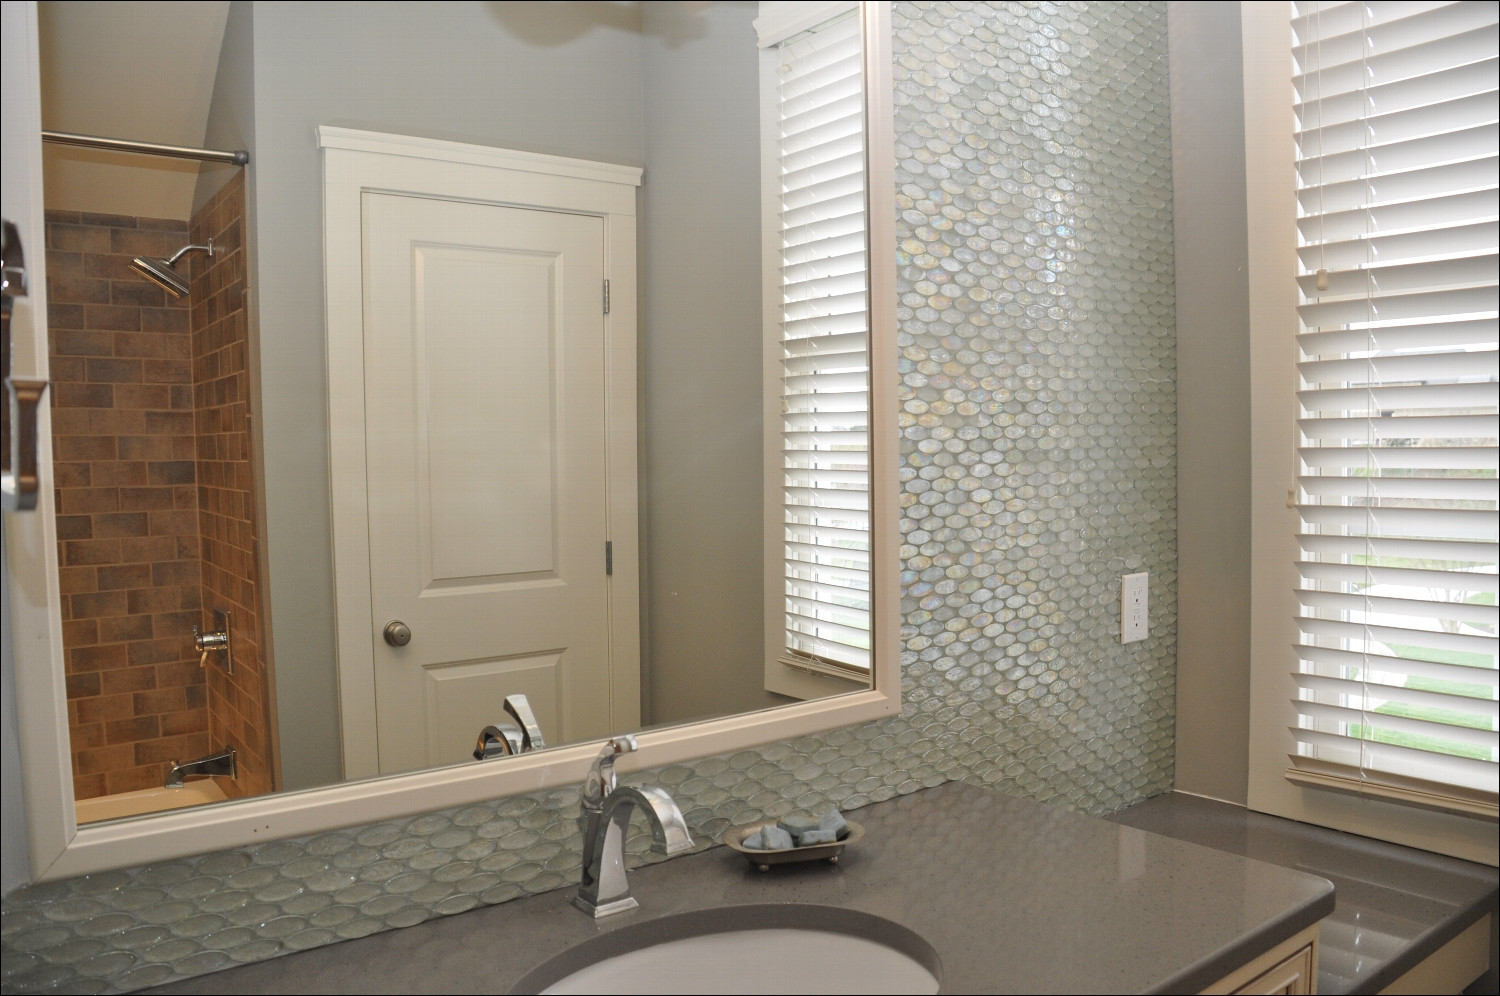 Vinyl Bathroom Wall Tiles
 31 amazing ideas and pictures of the best vinyl tile for